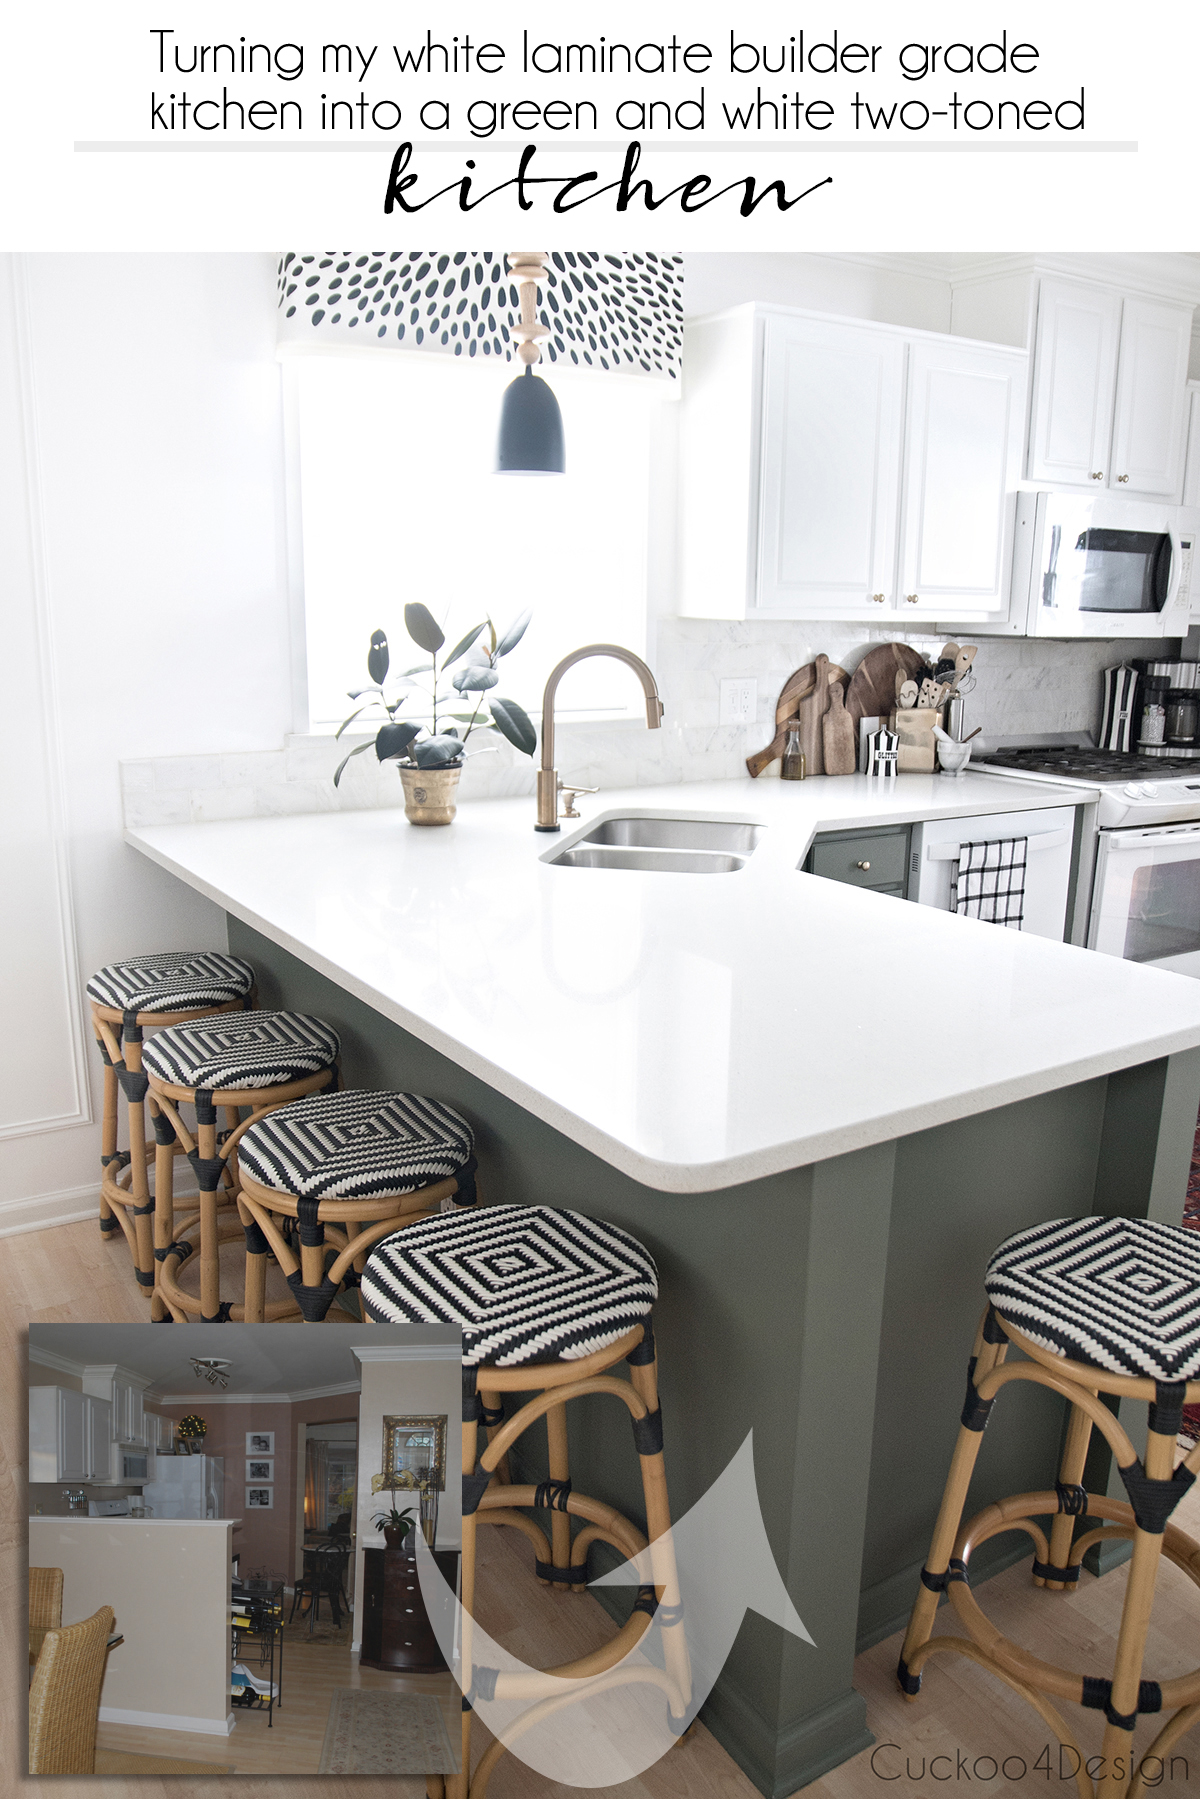 Turning my white laminate builder grade kitchen into a green and white two-toned kitchen